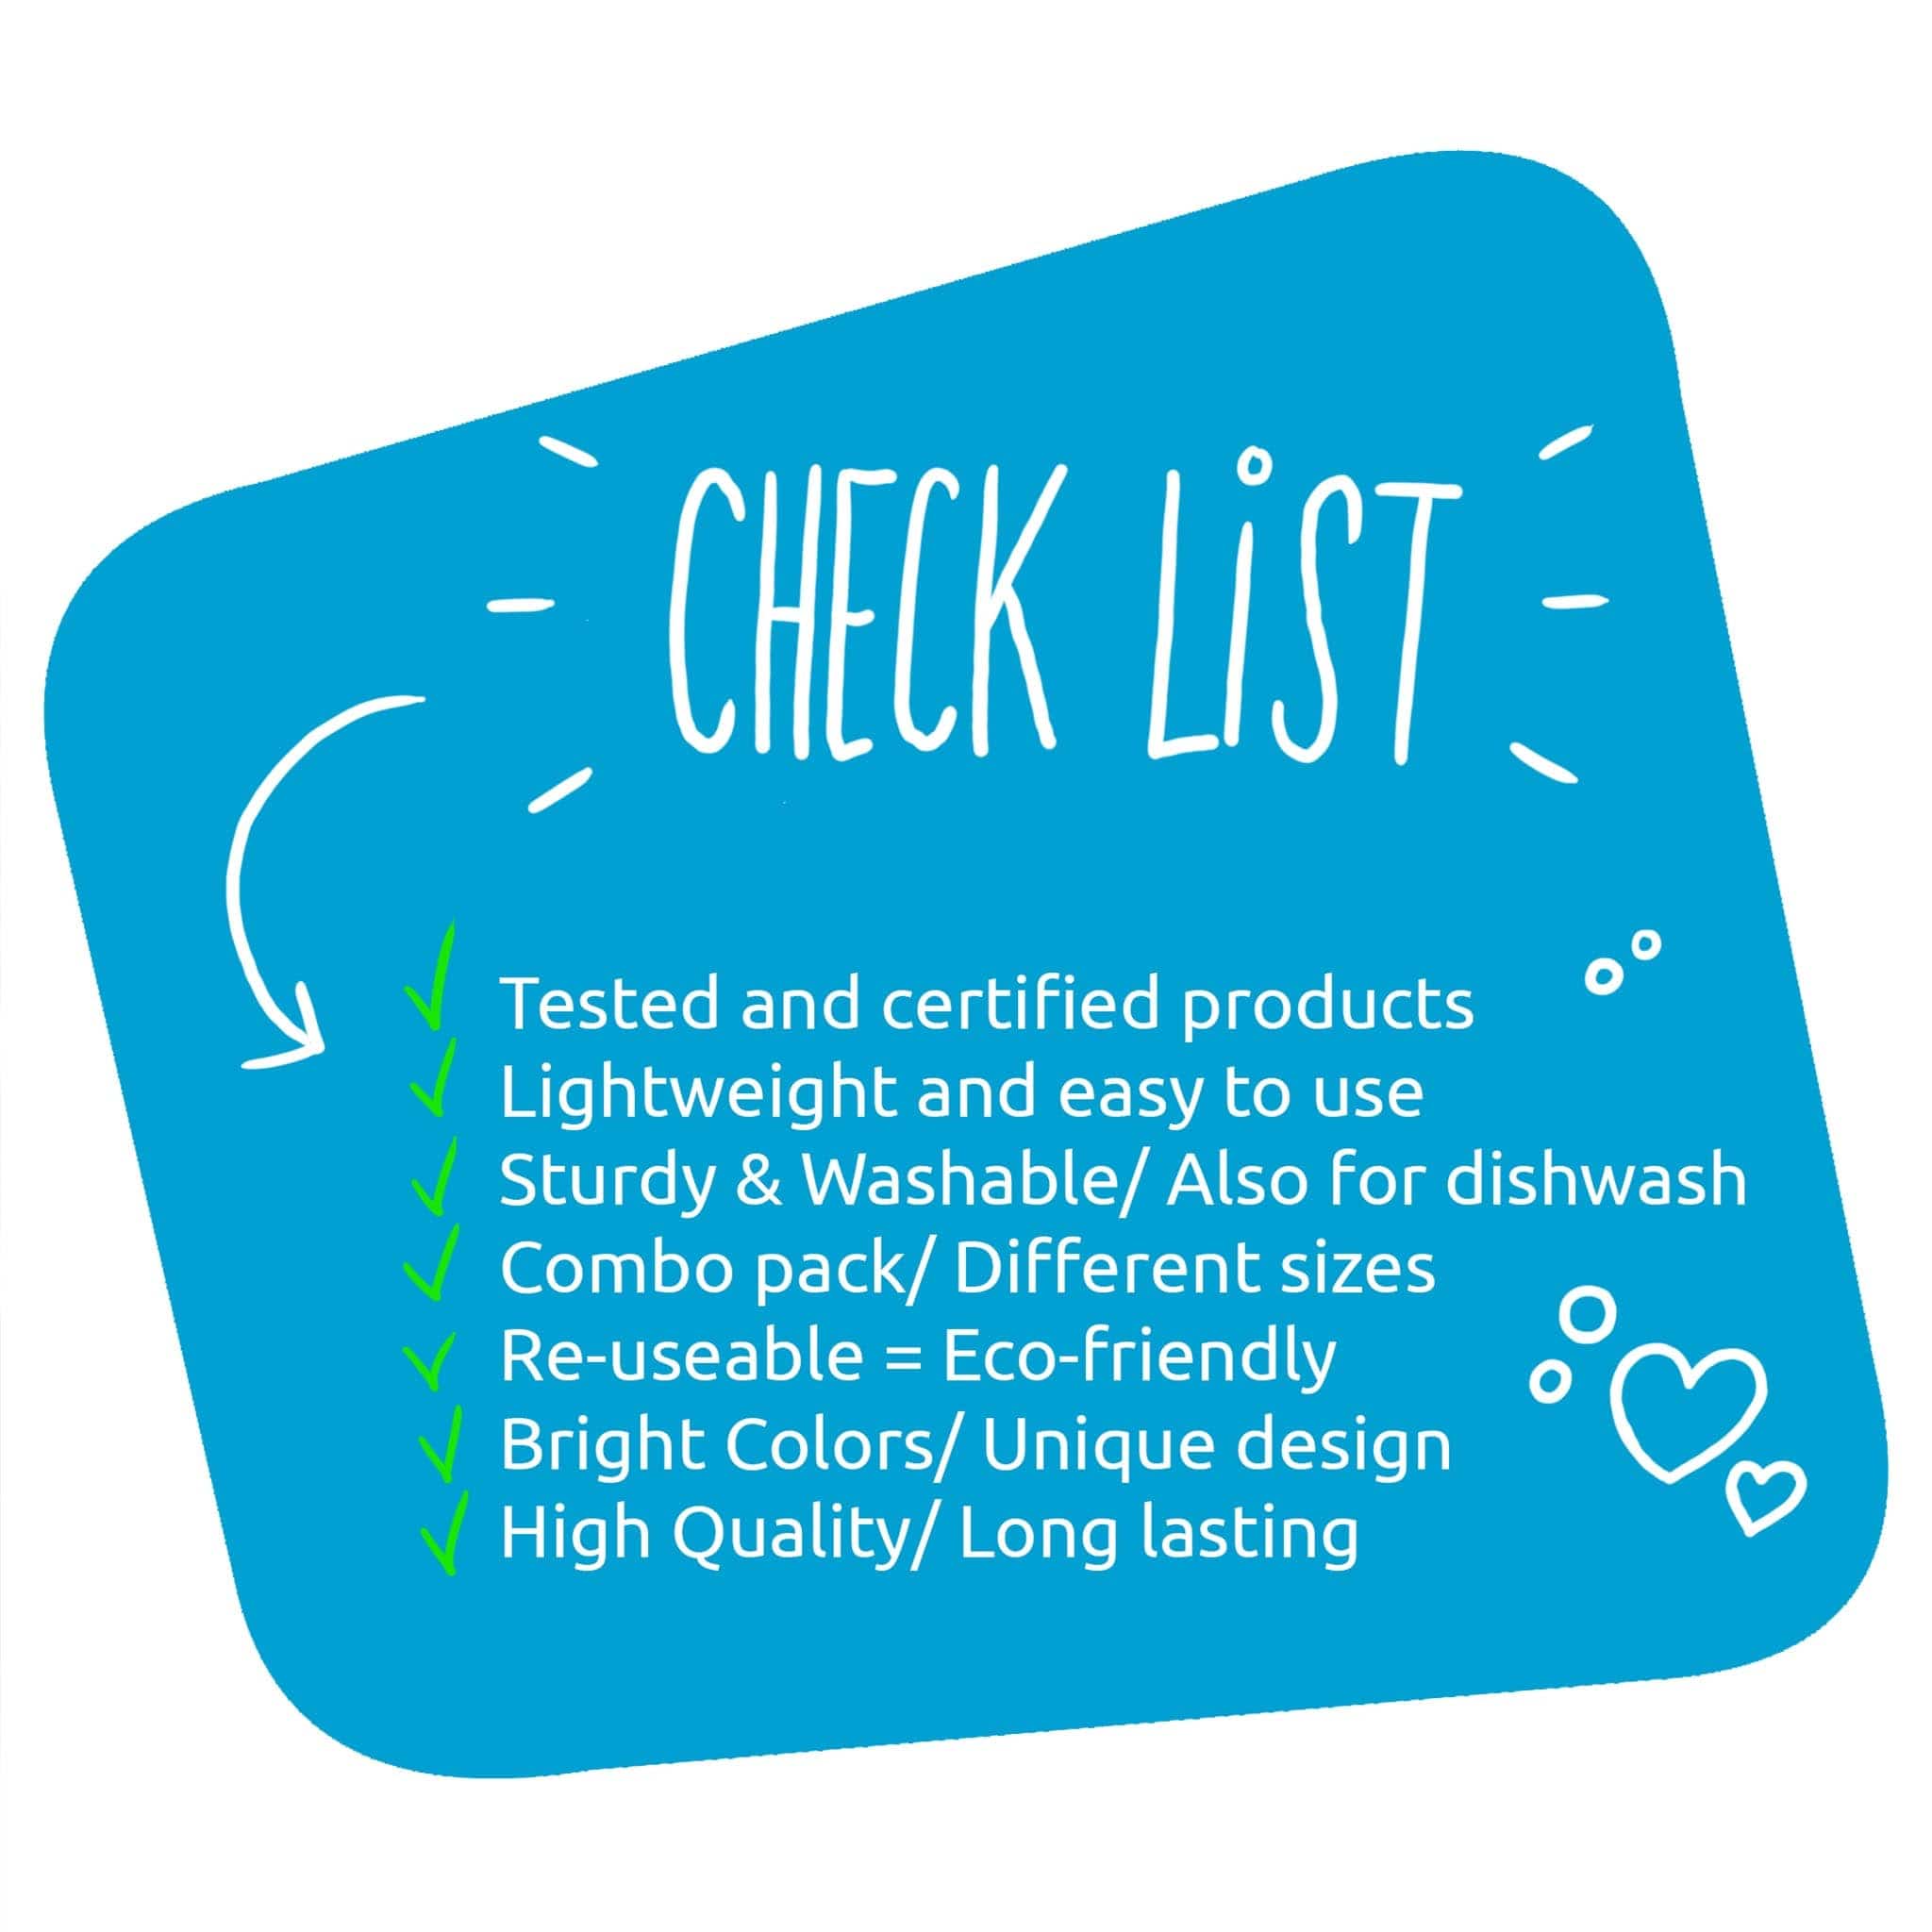 Crazy Safety Product Checklist